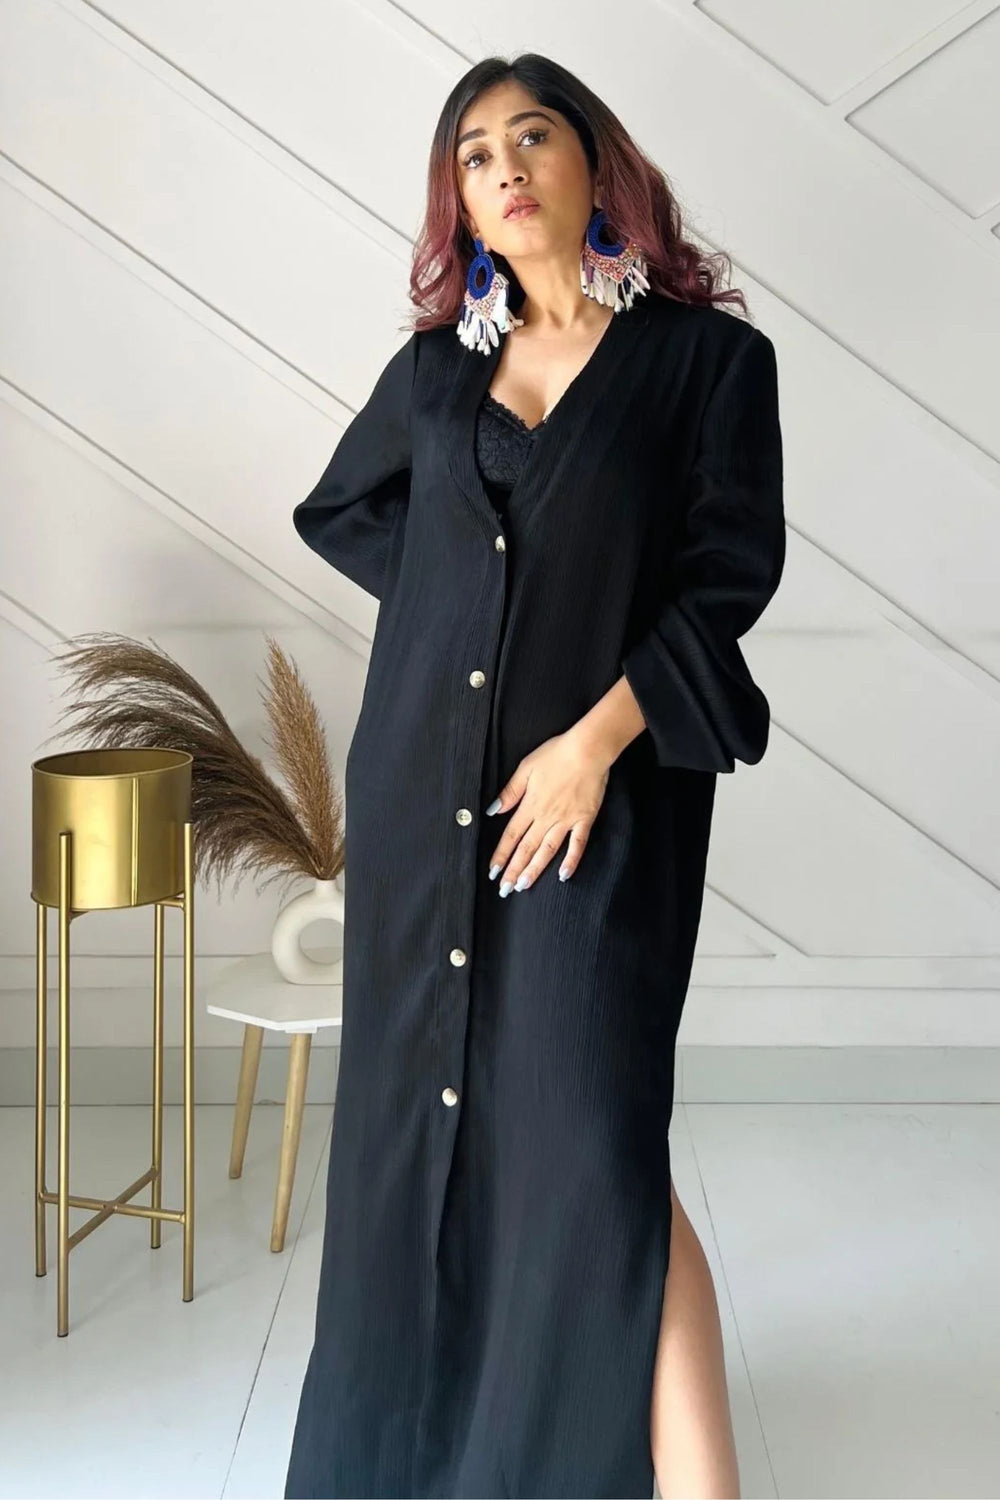 Classic black shirt dress for evening occasions